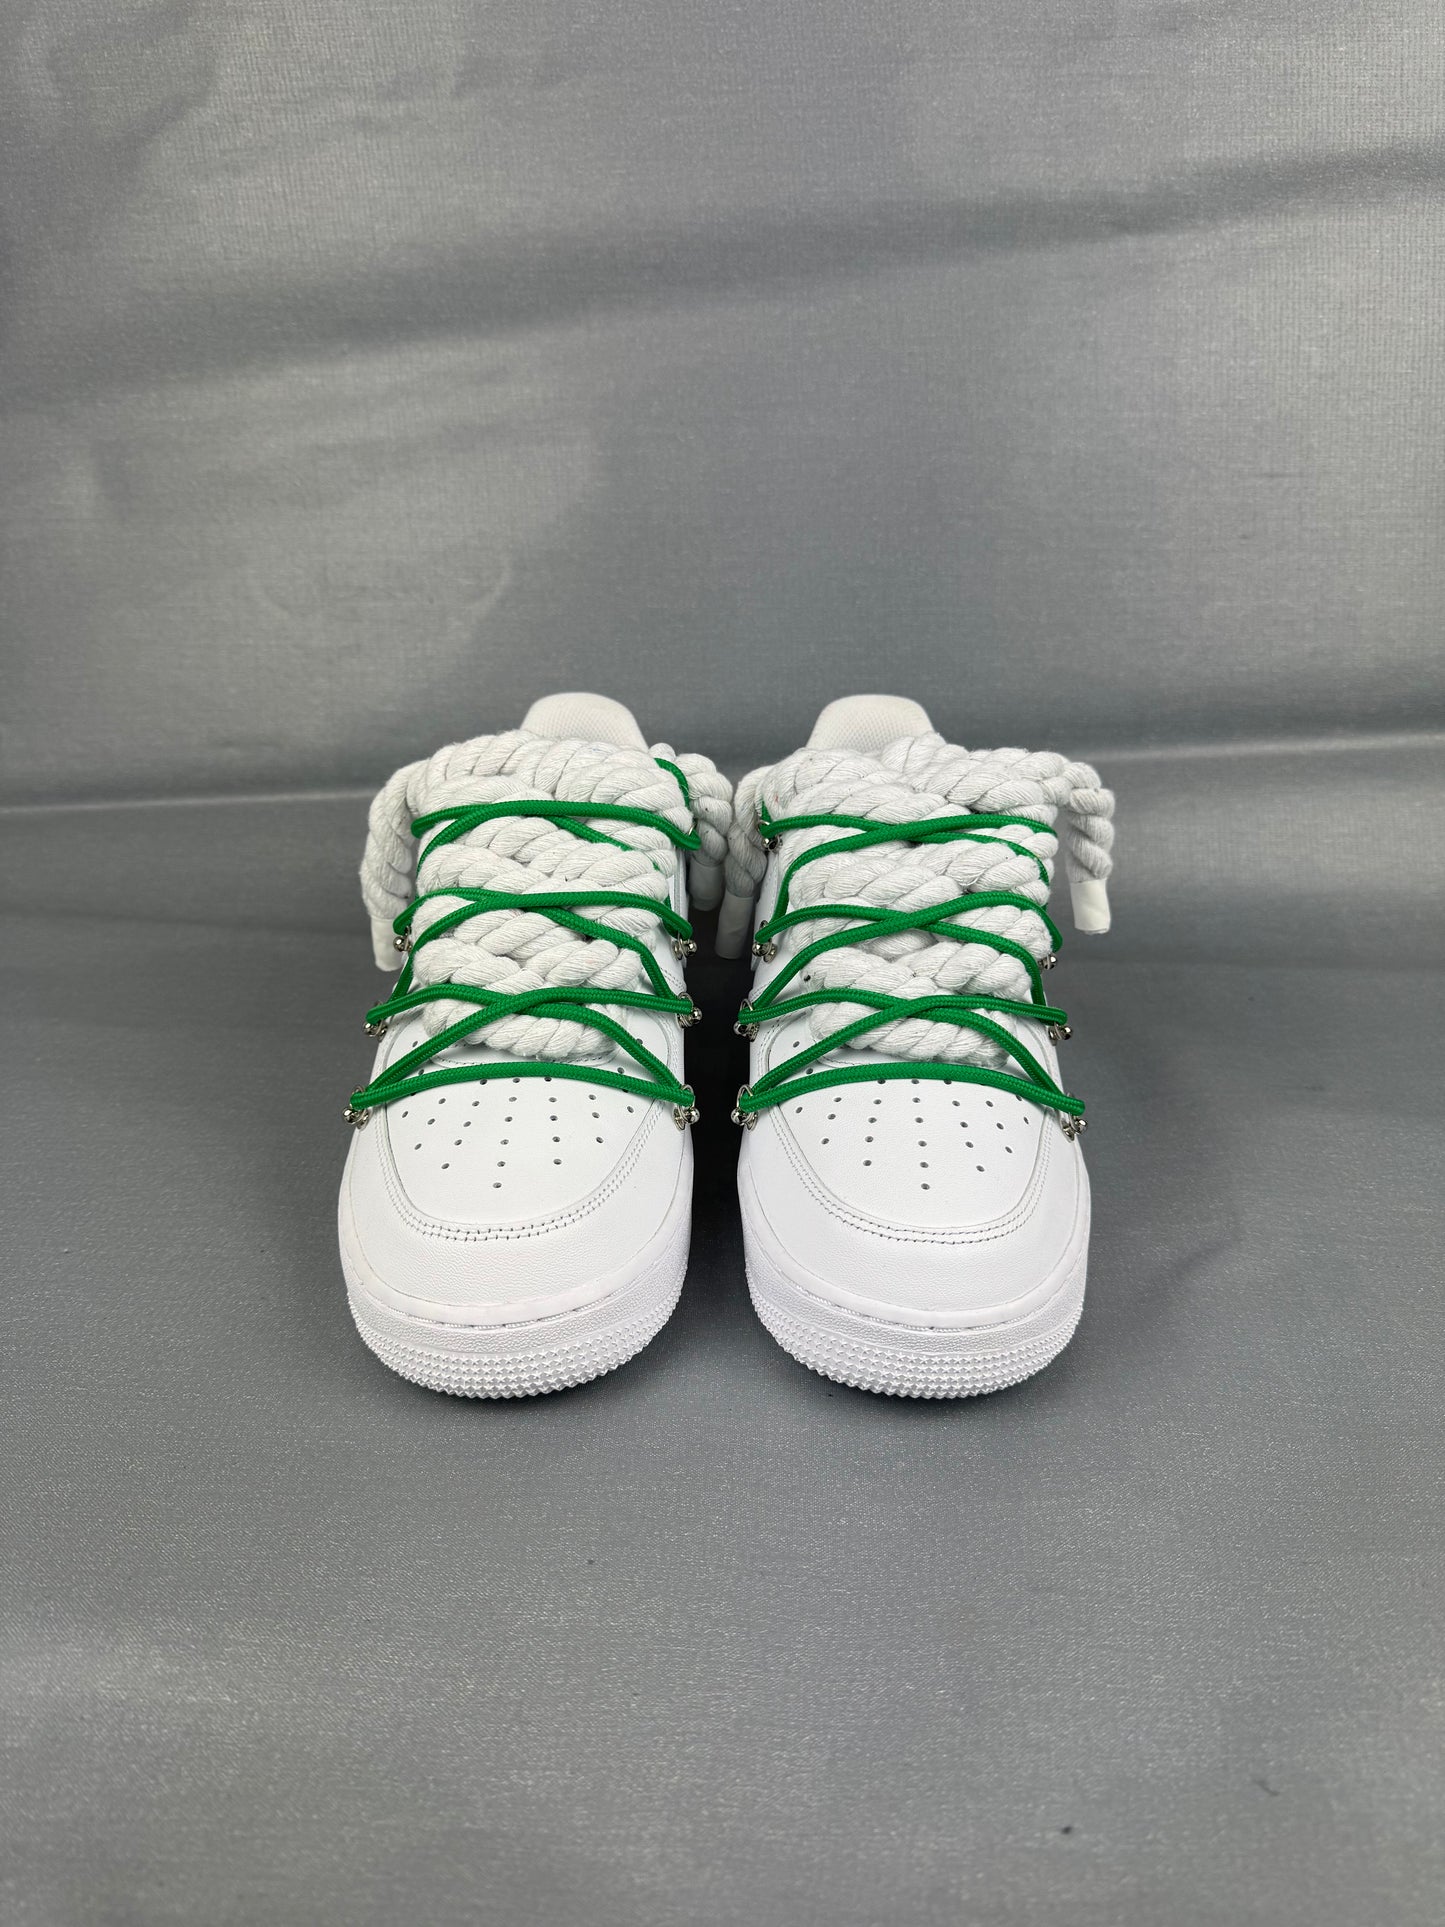 AF1 White | Spesh Laces Green